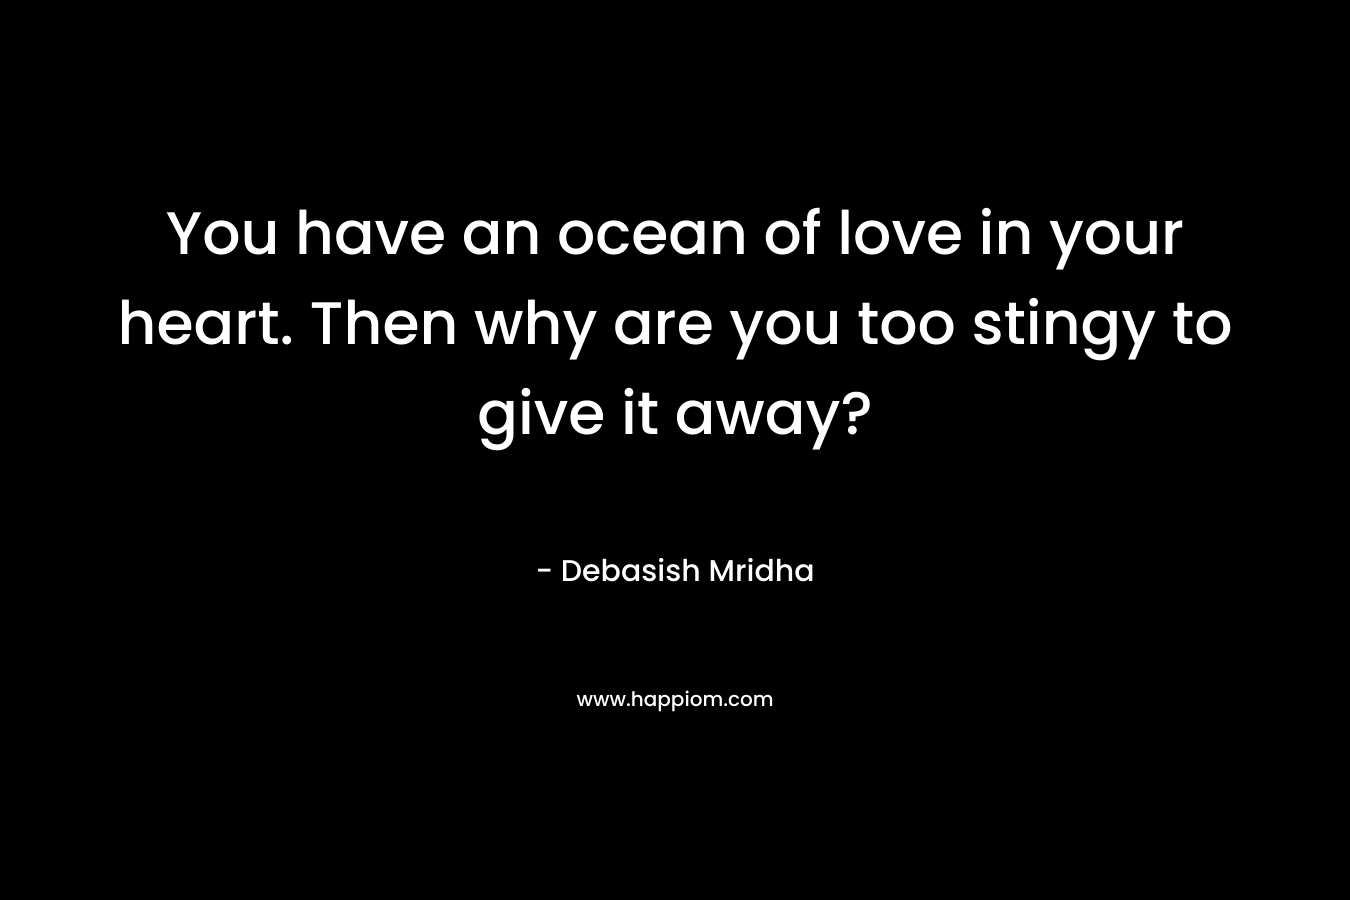 You have an ocean of love in your heart. Then why are you too stingy to give it away?